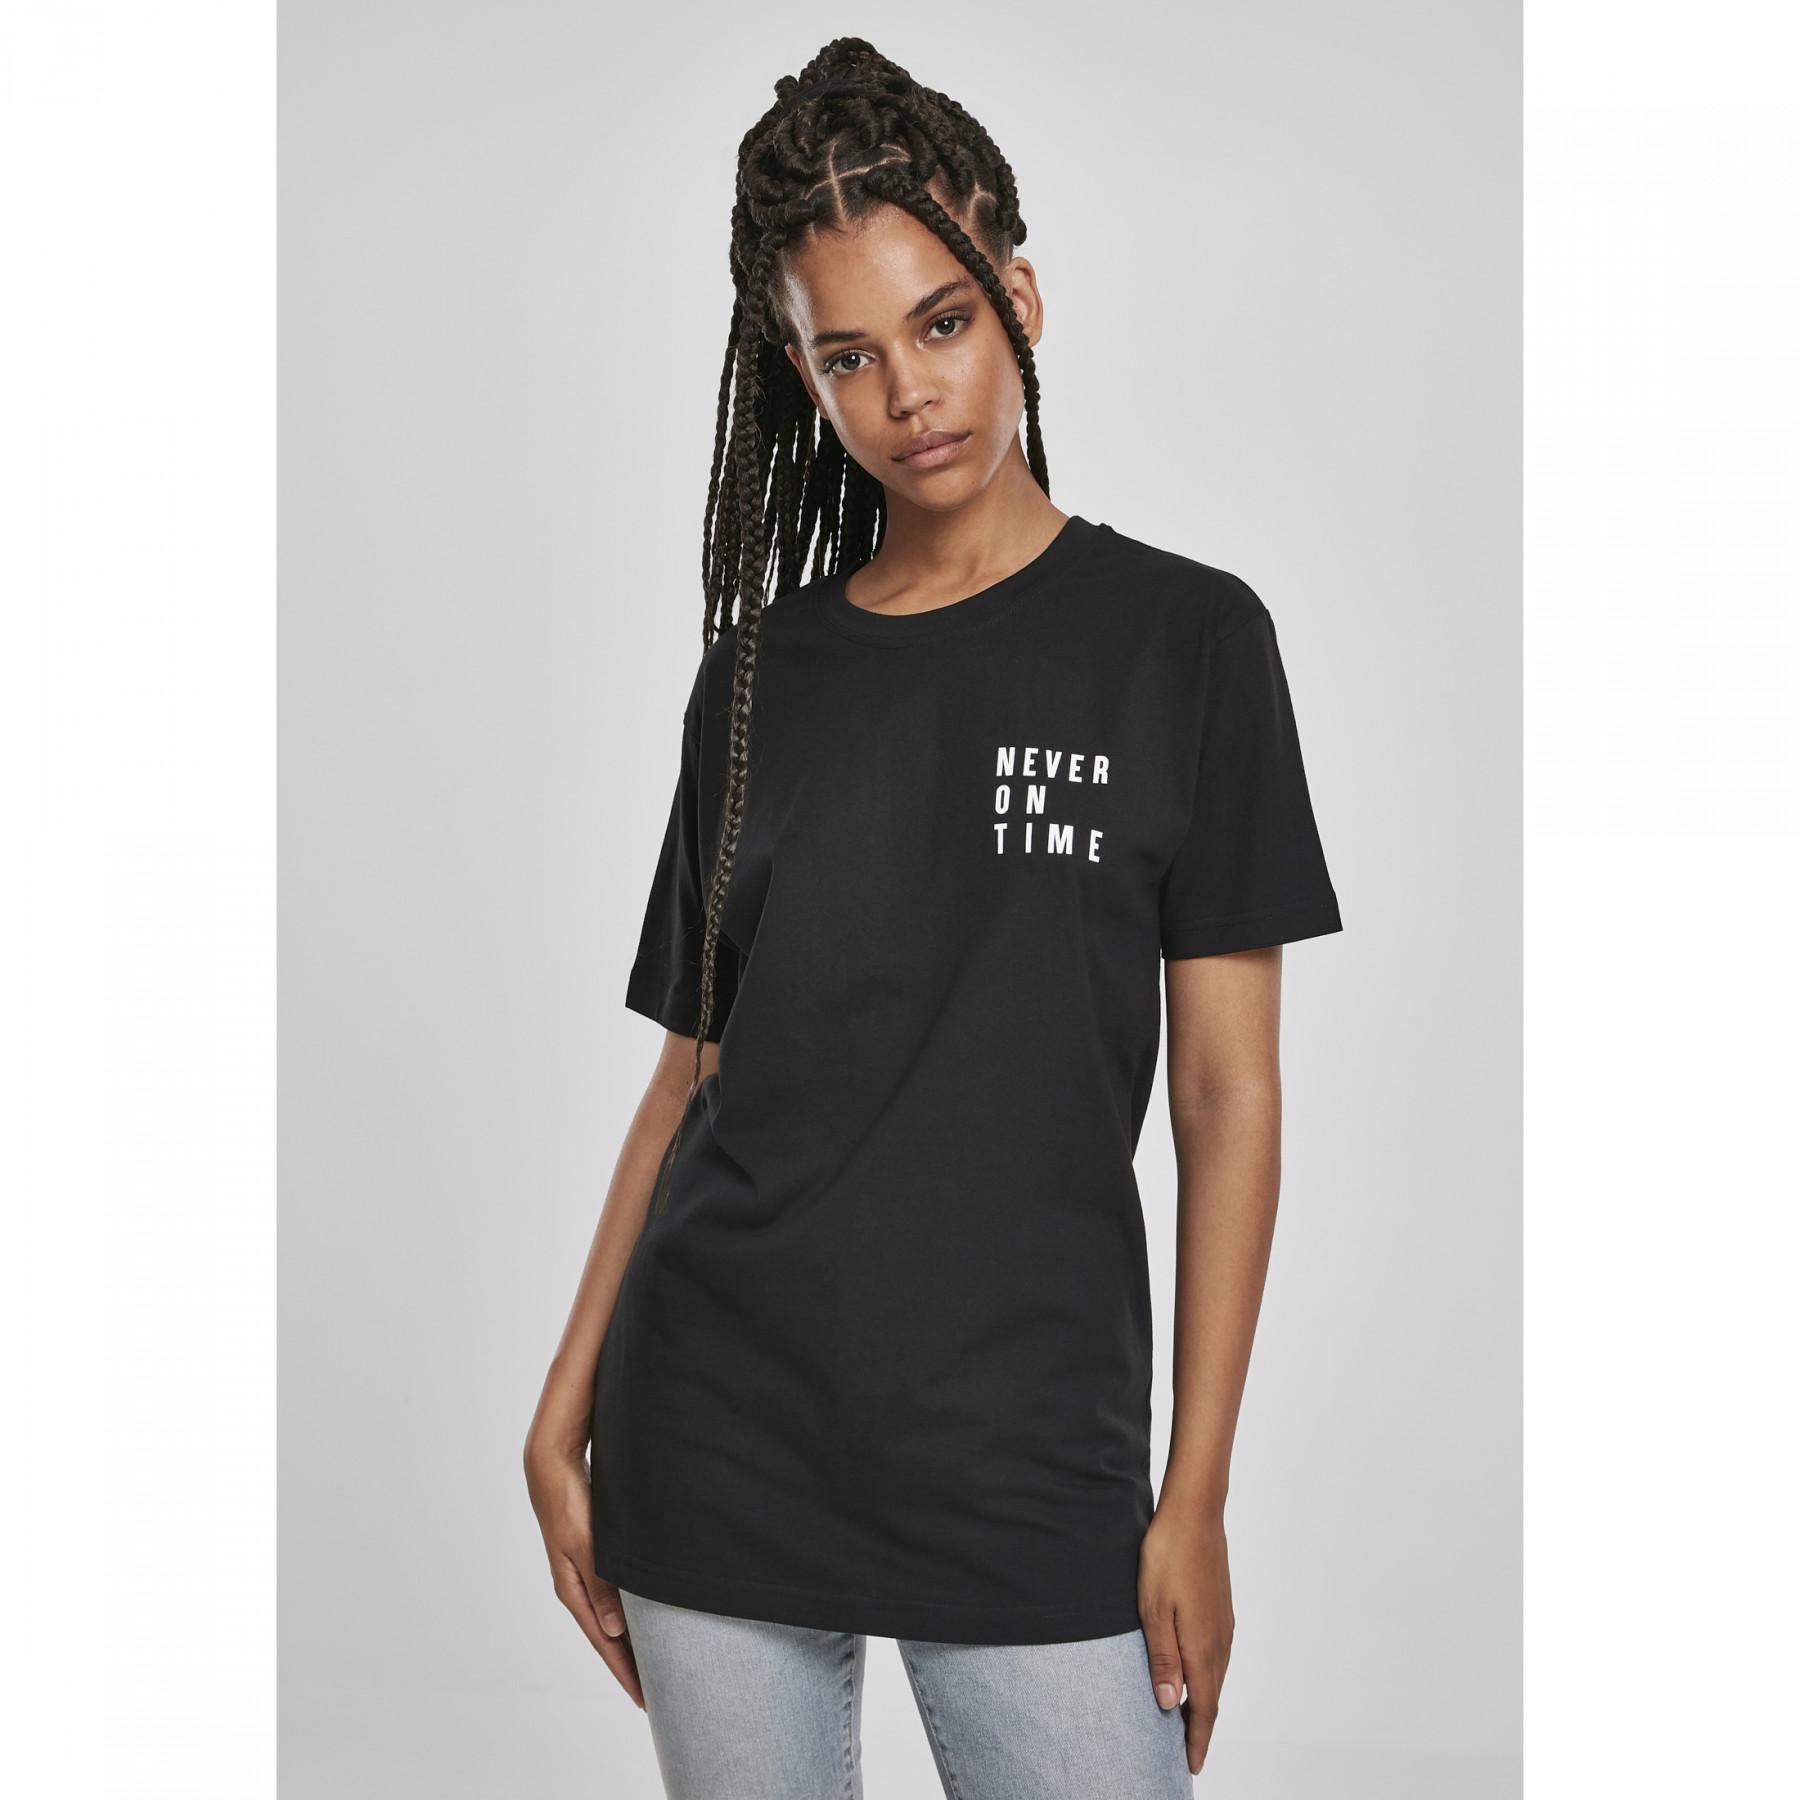 Camiseta mujer Mister Tee never on time